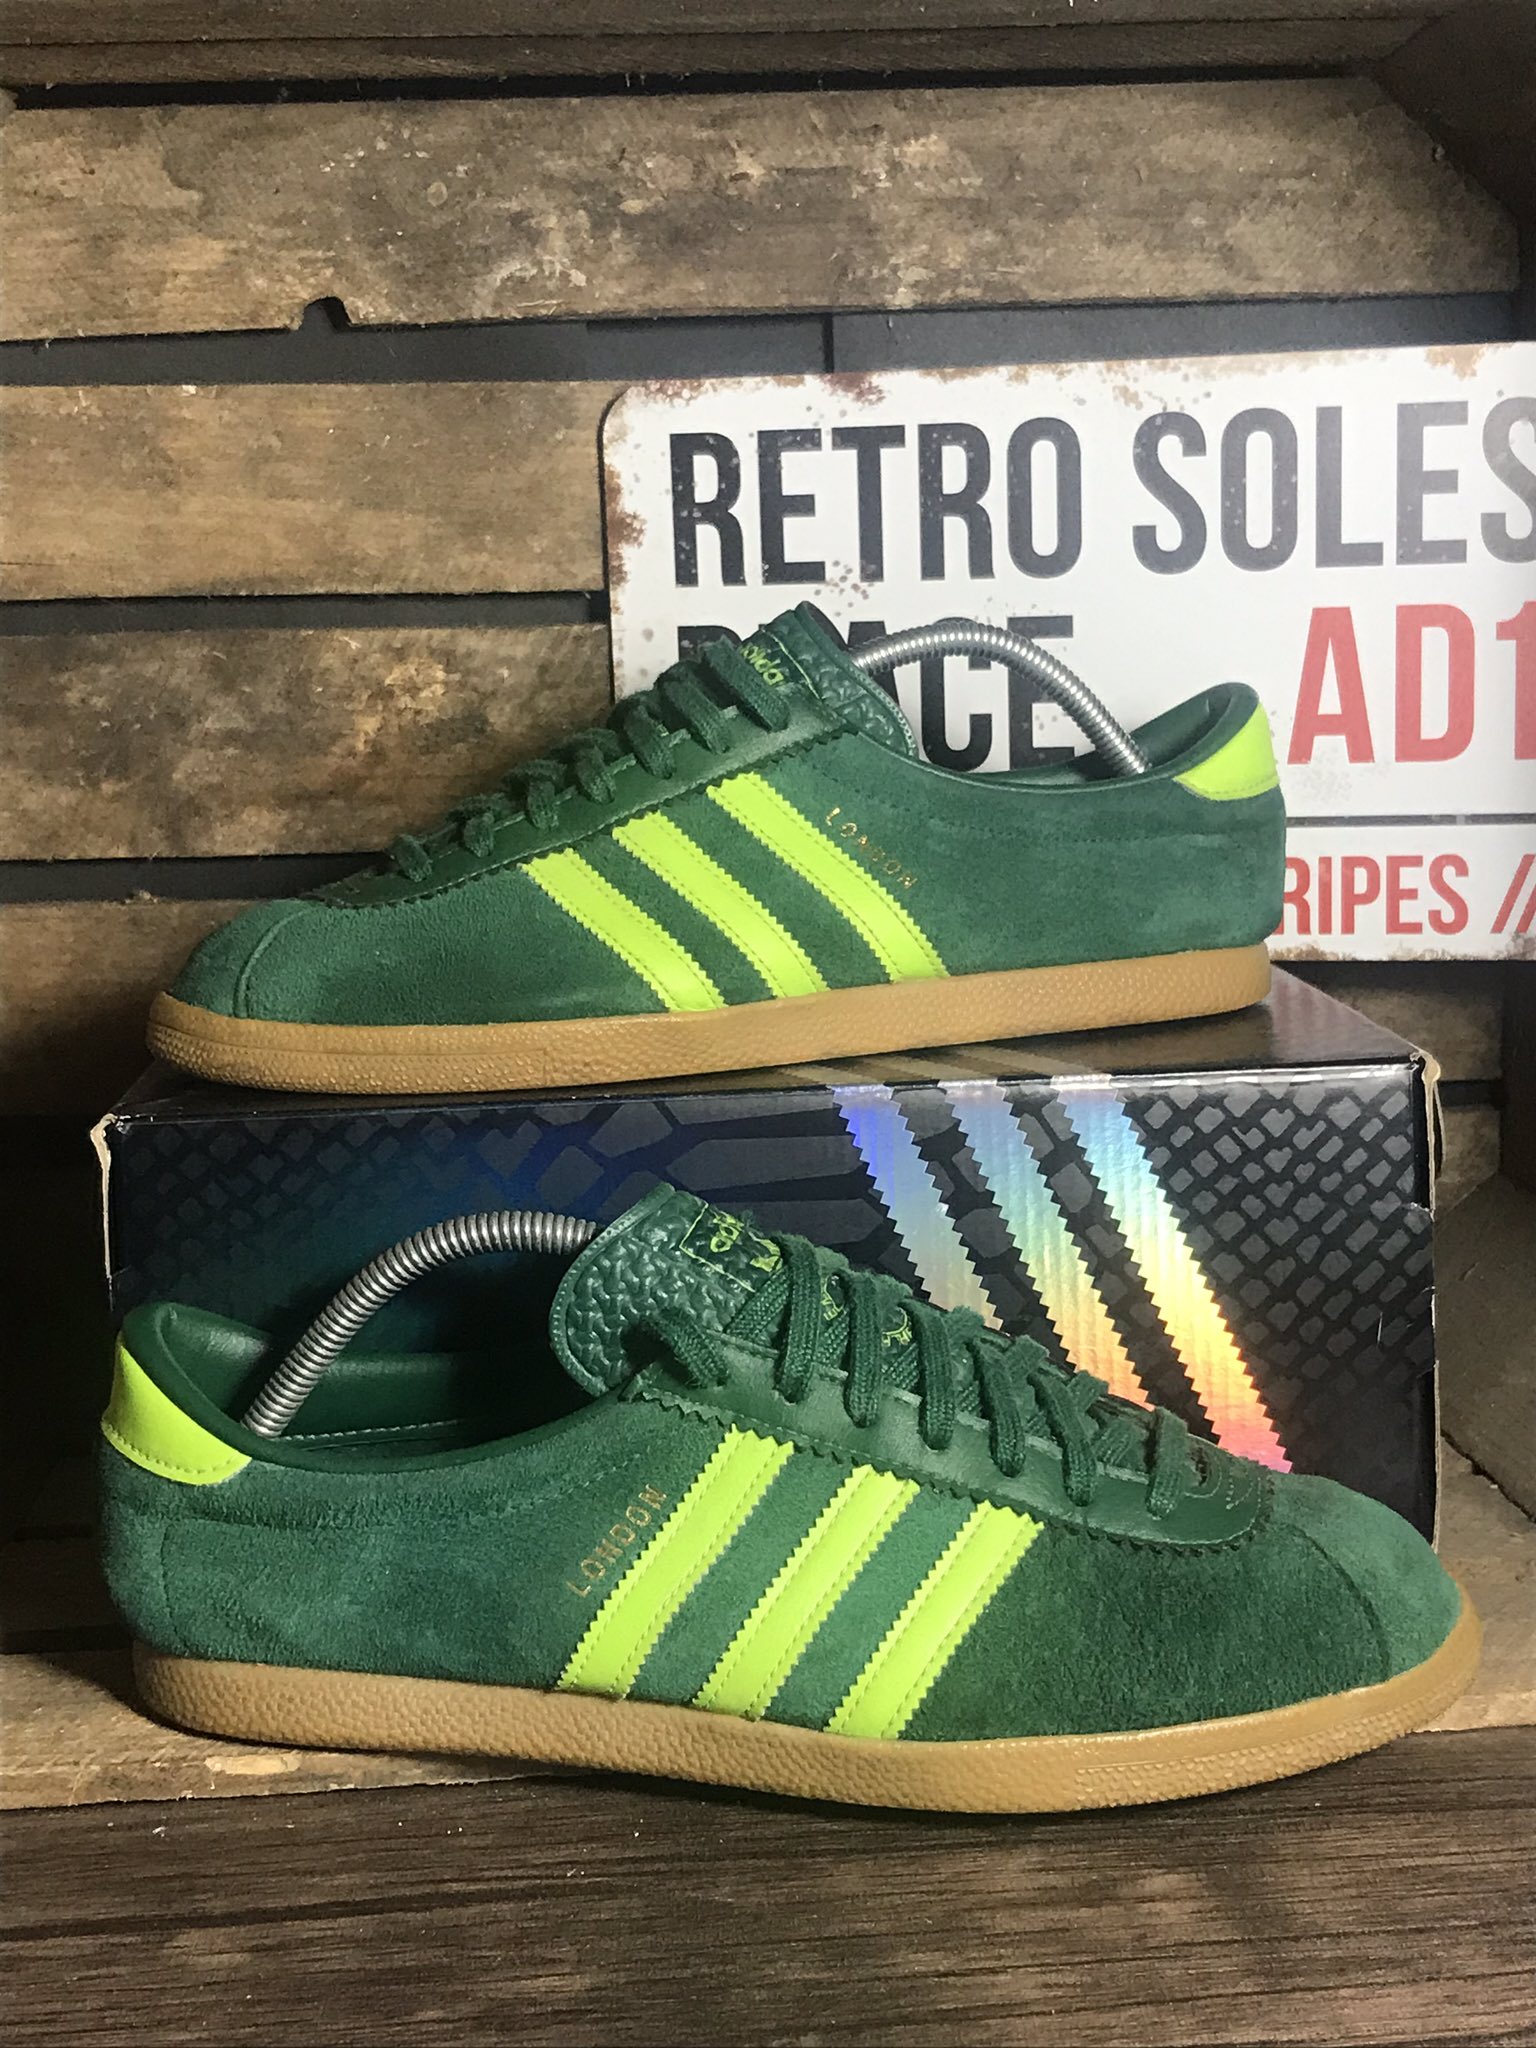 Retro Soles on Twitter: "For Sale:- #Adidas #London #Slime Date of Release:- 10/10 UK 9 Condition:- Good Pre Worn With OG Box:- No £150 DELIVERED More Photos Available RT me